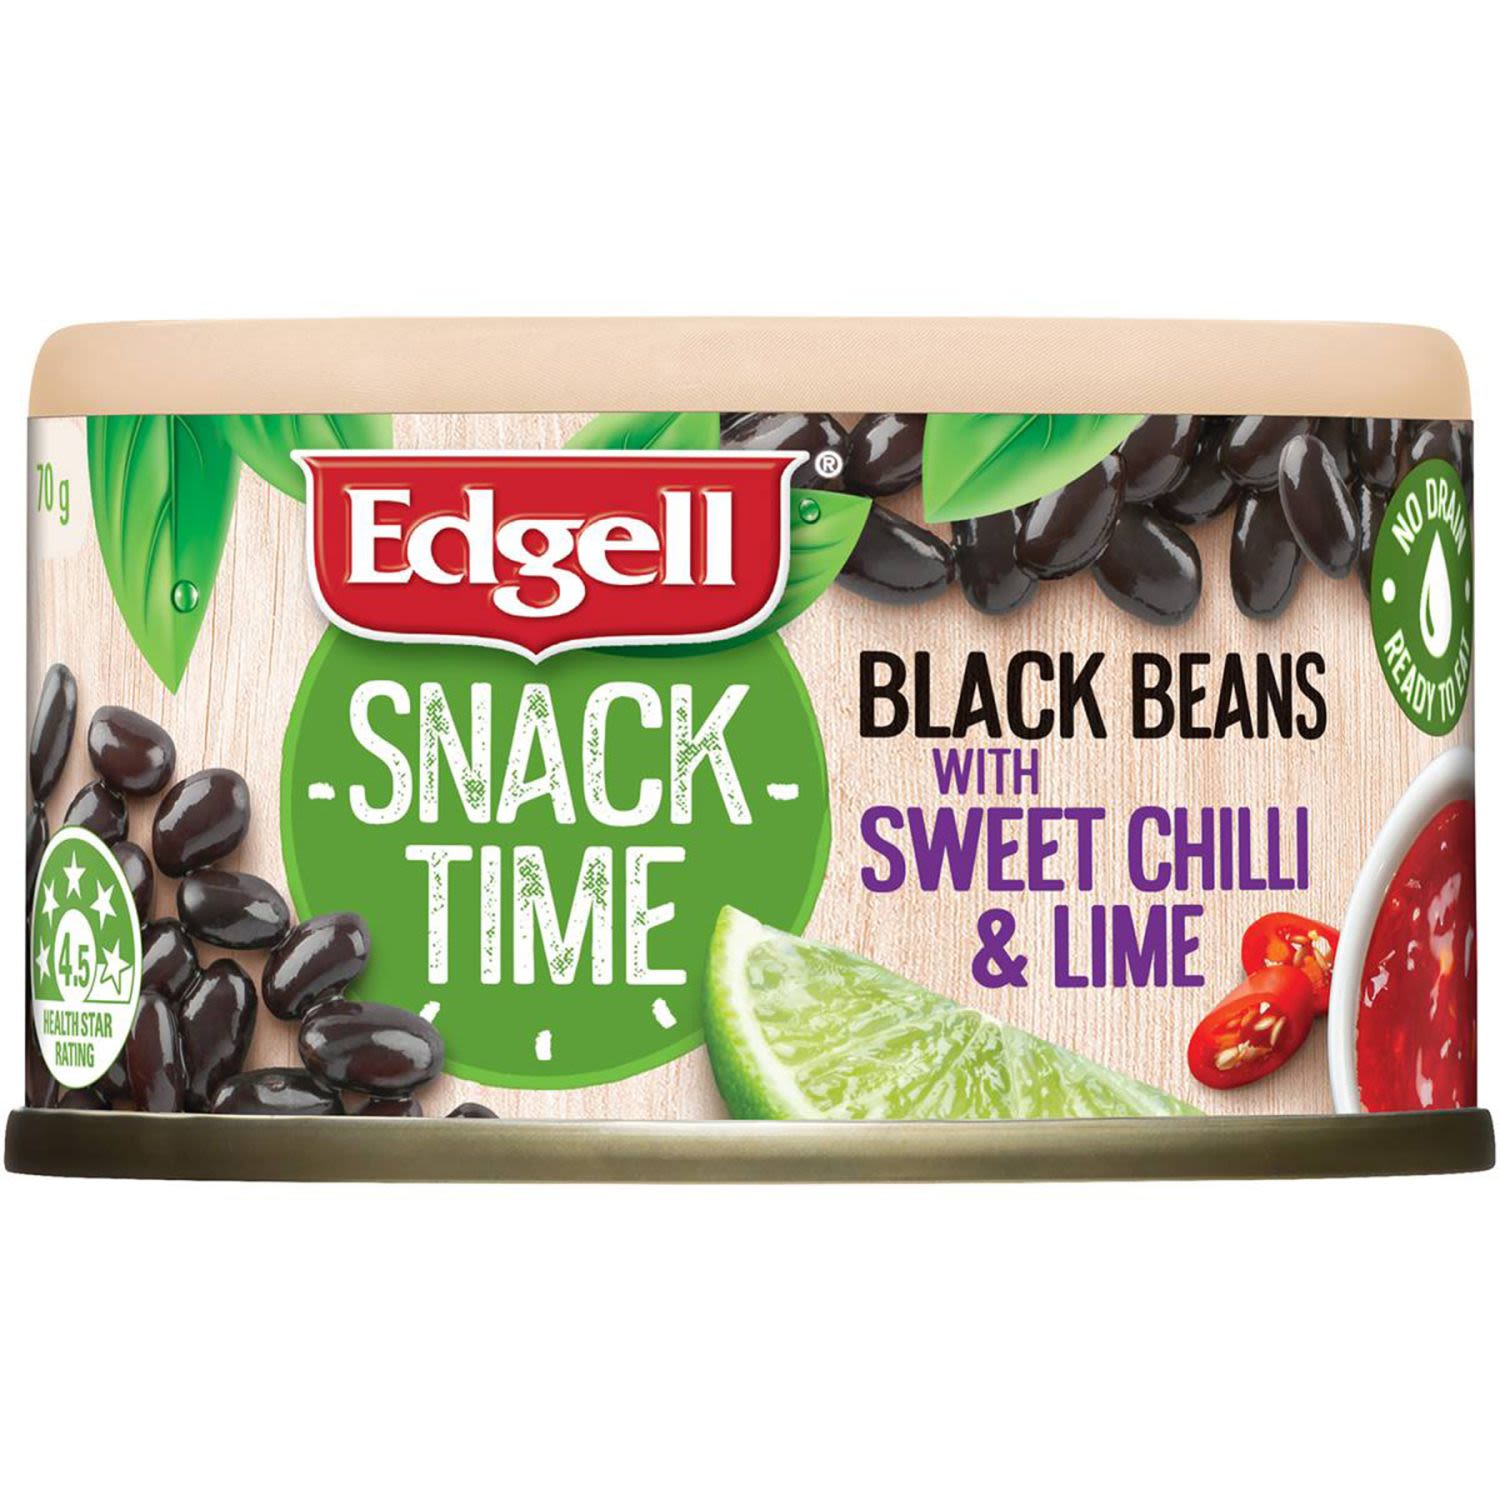 Edgell Snack Time Black Beans With Sweet Chilli & Lime, 70 Gram